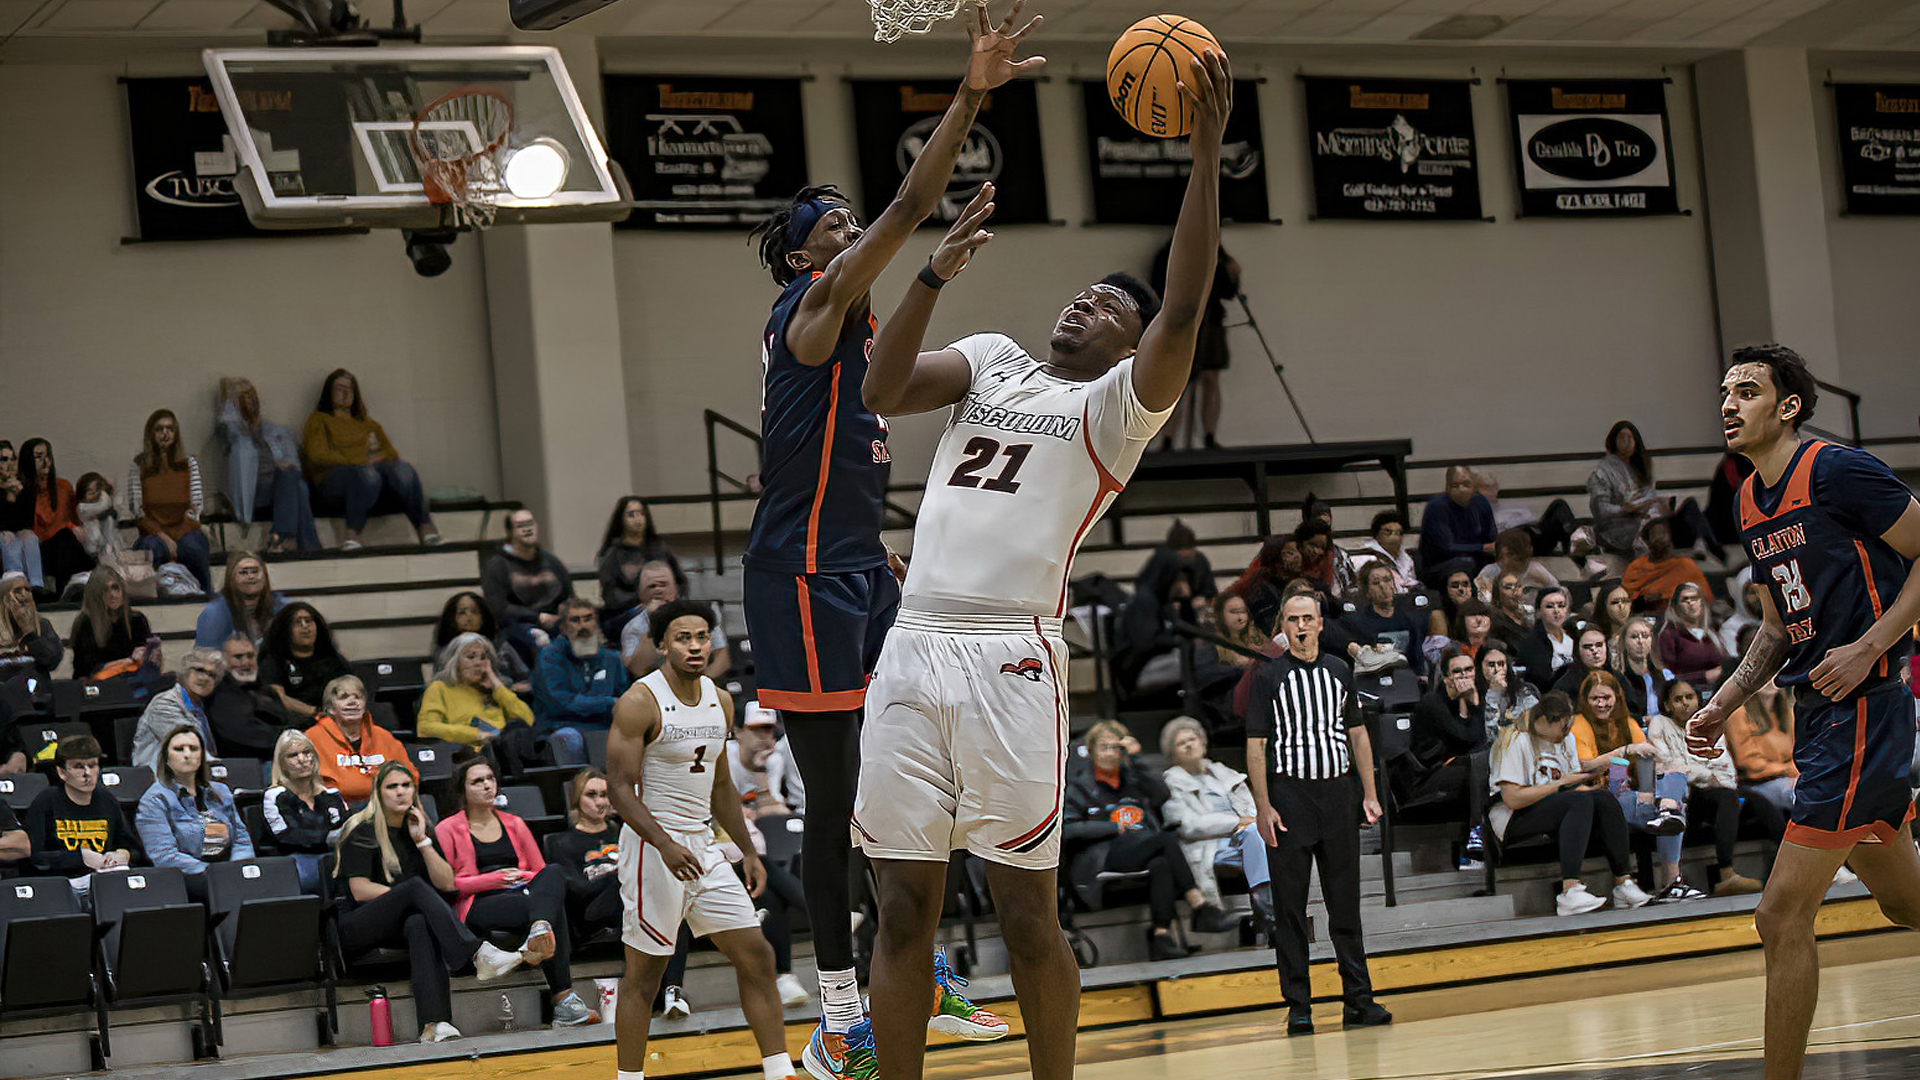 Inady Legiste finished with 19 points and 10 rebounds in Tusculum's 88-77 win over Clayton State (photo by Chuck Williams)